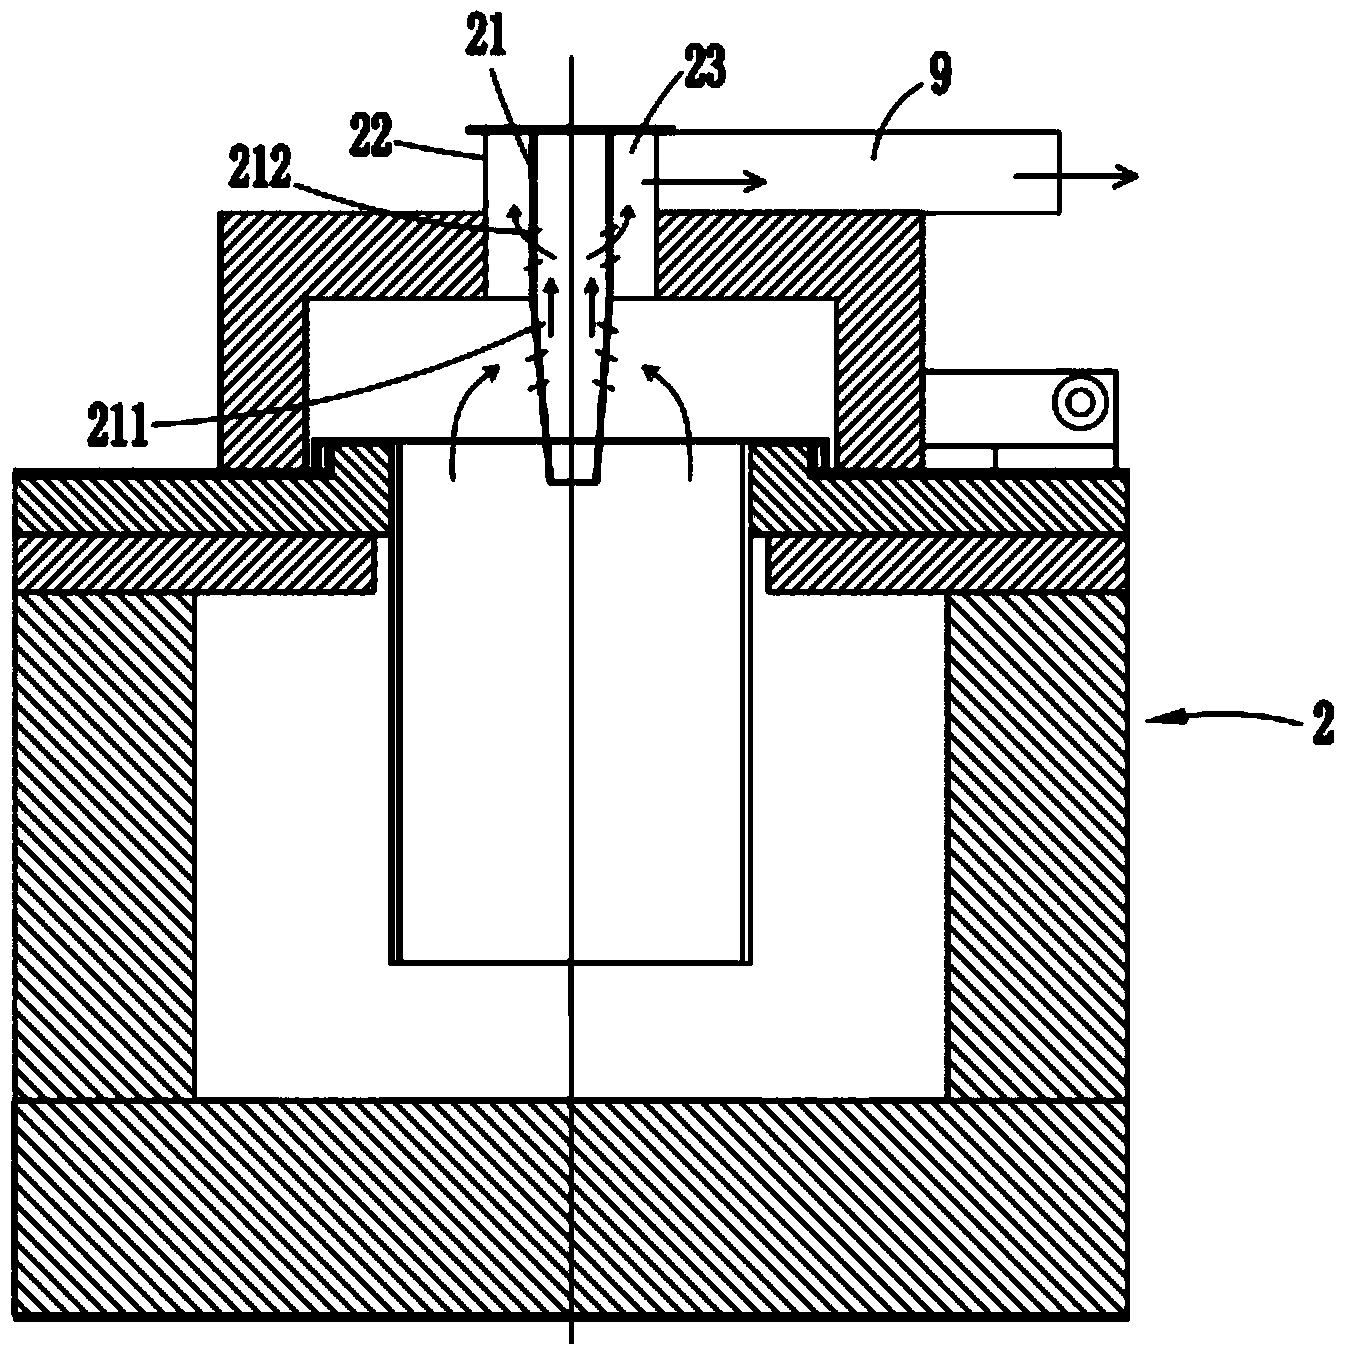 Carbon-nitrogen-oxygen combined treatment process and device